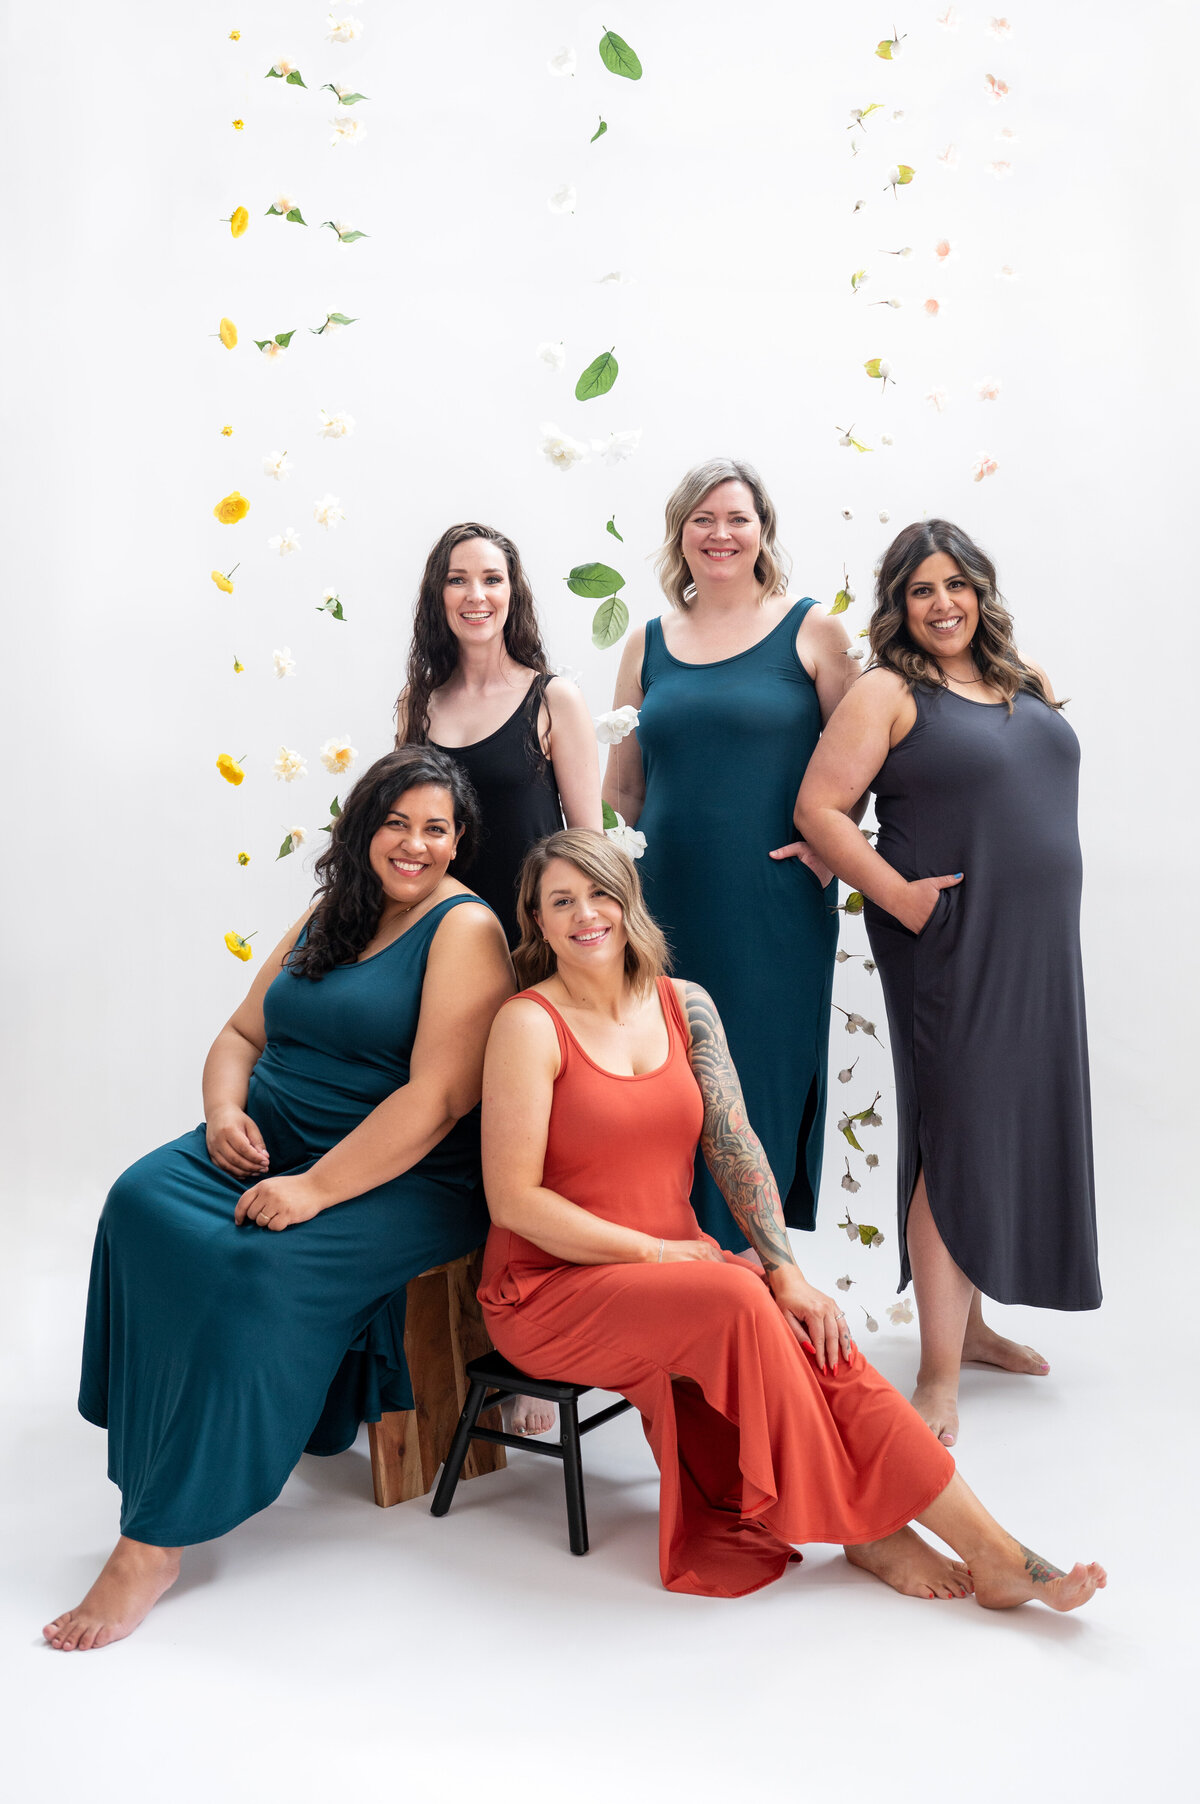 Listing photo of 5 women wearing maxi dresses on a flower backdrop